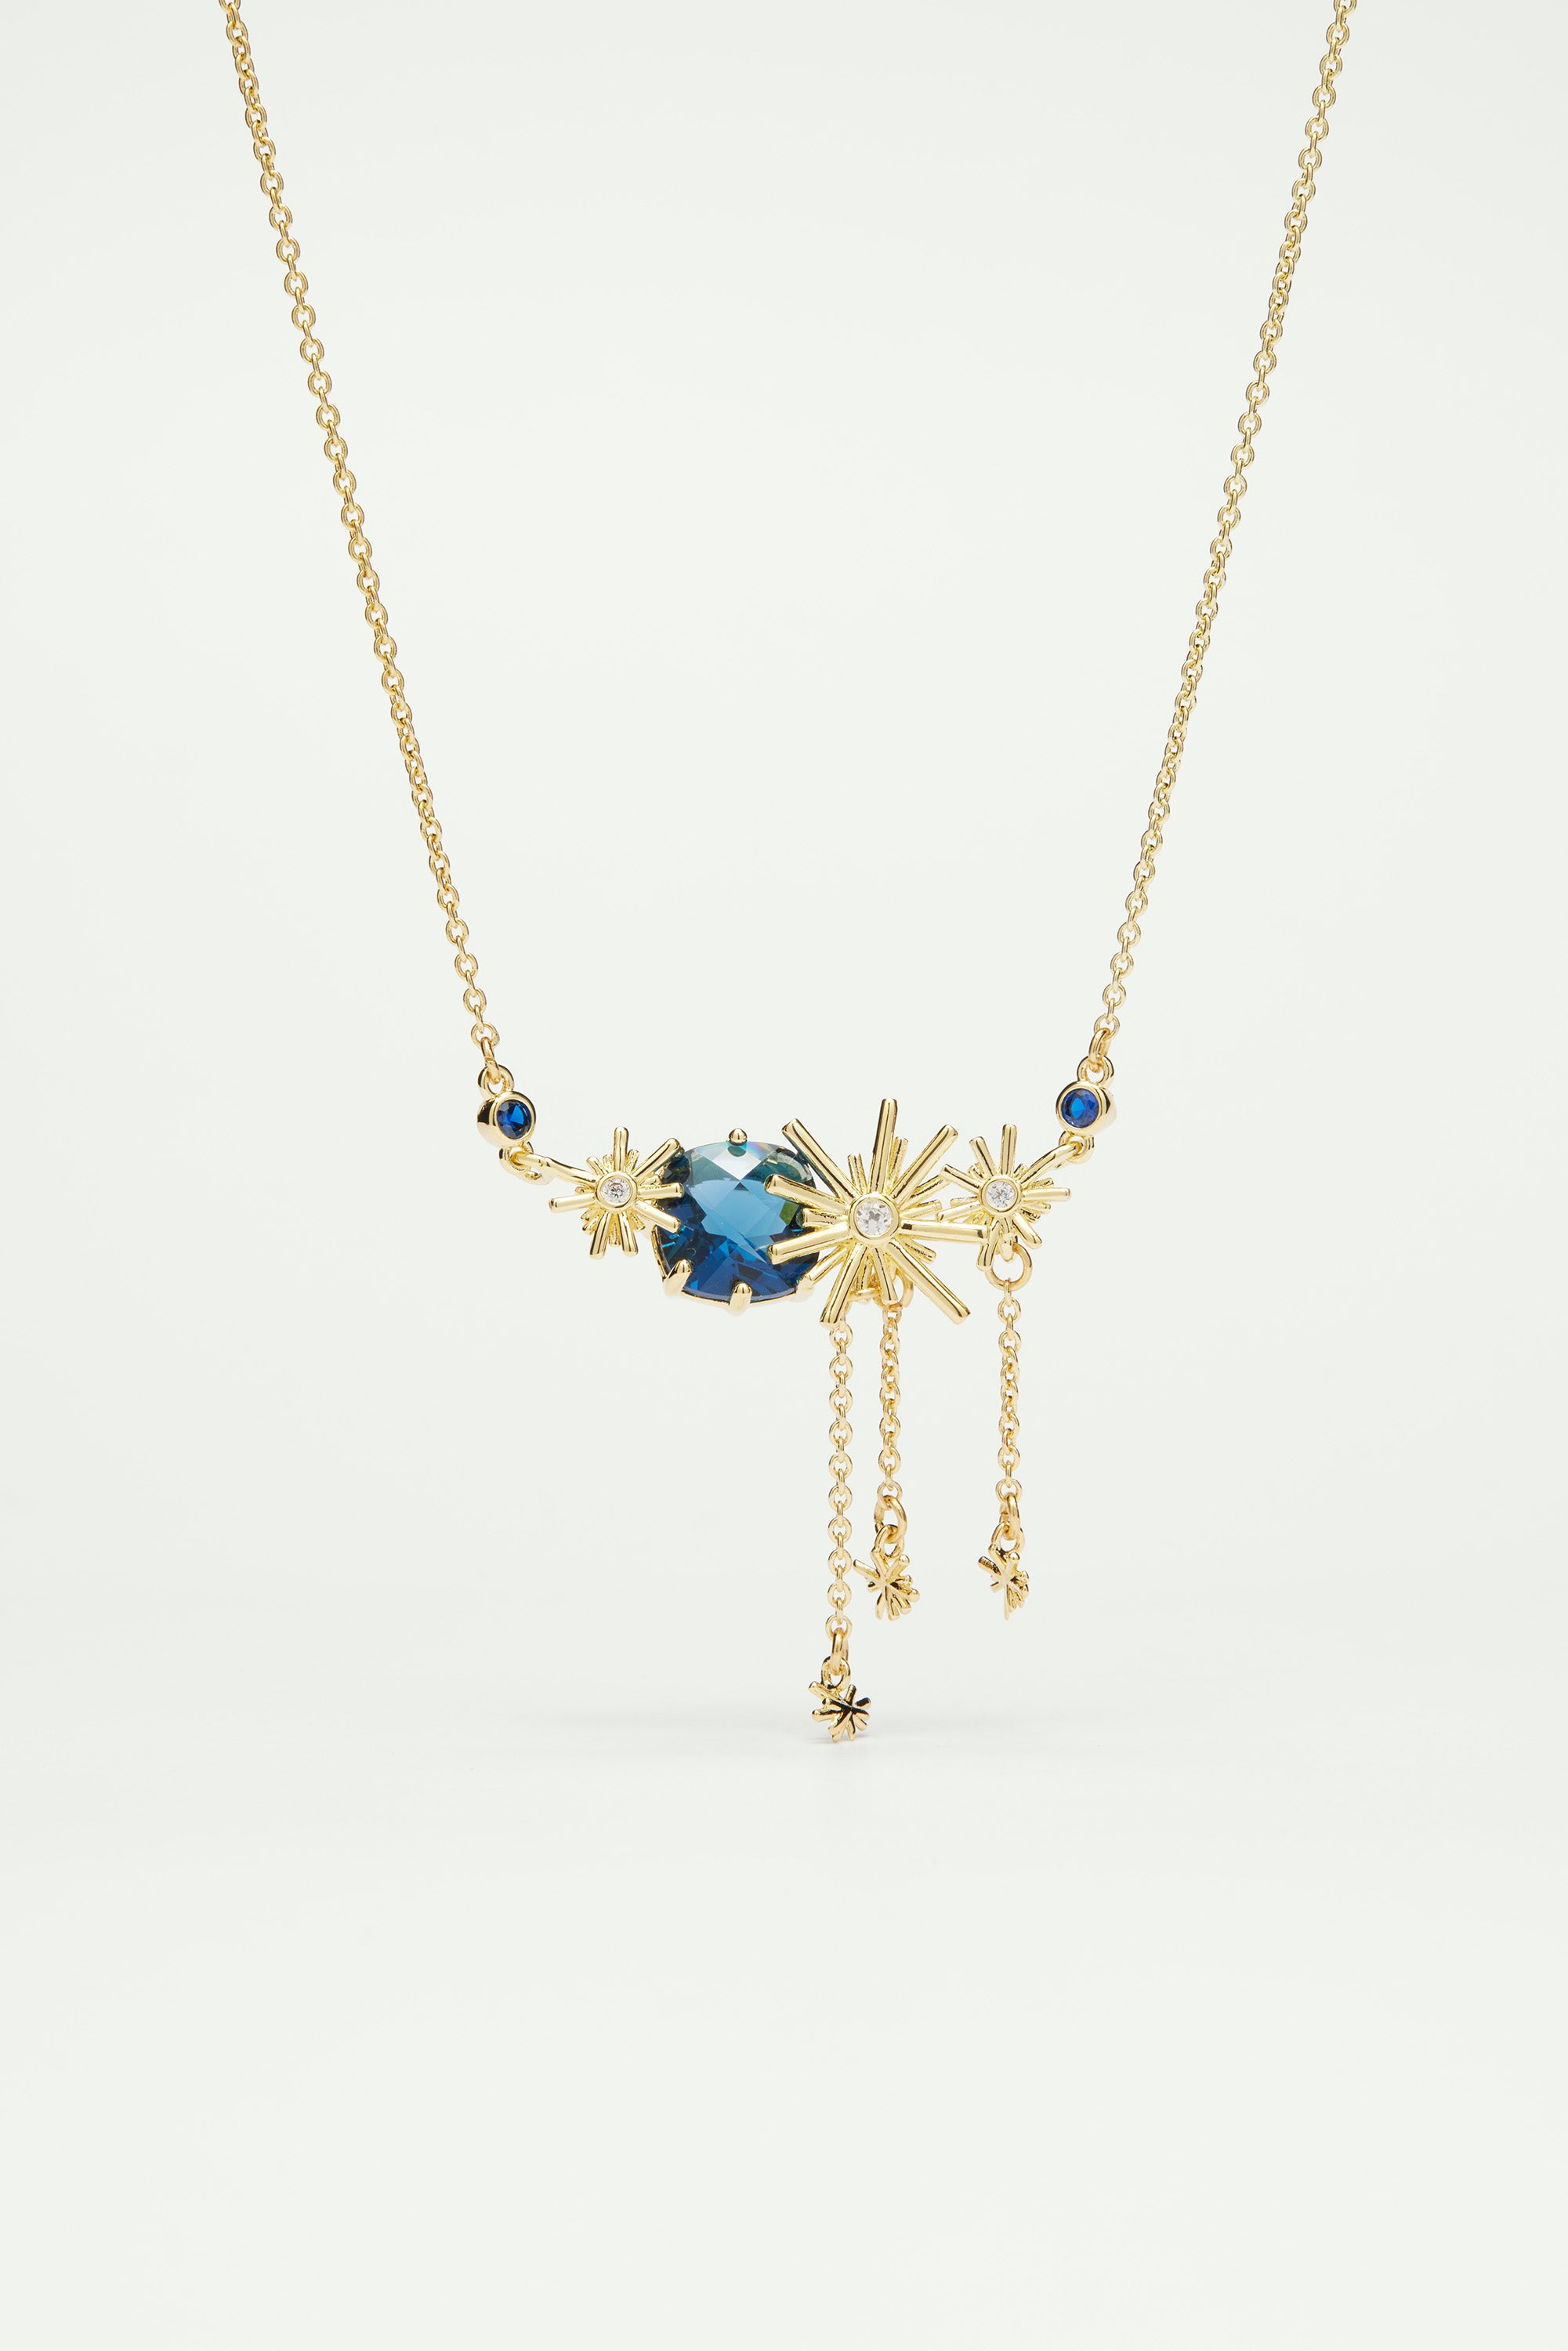 Gold stars and blue stone statement necklace